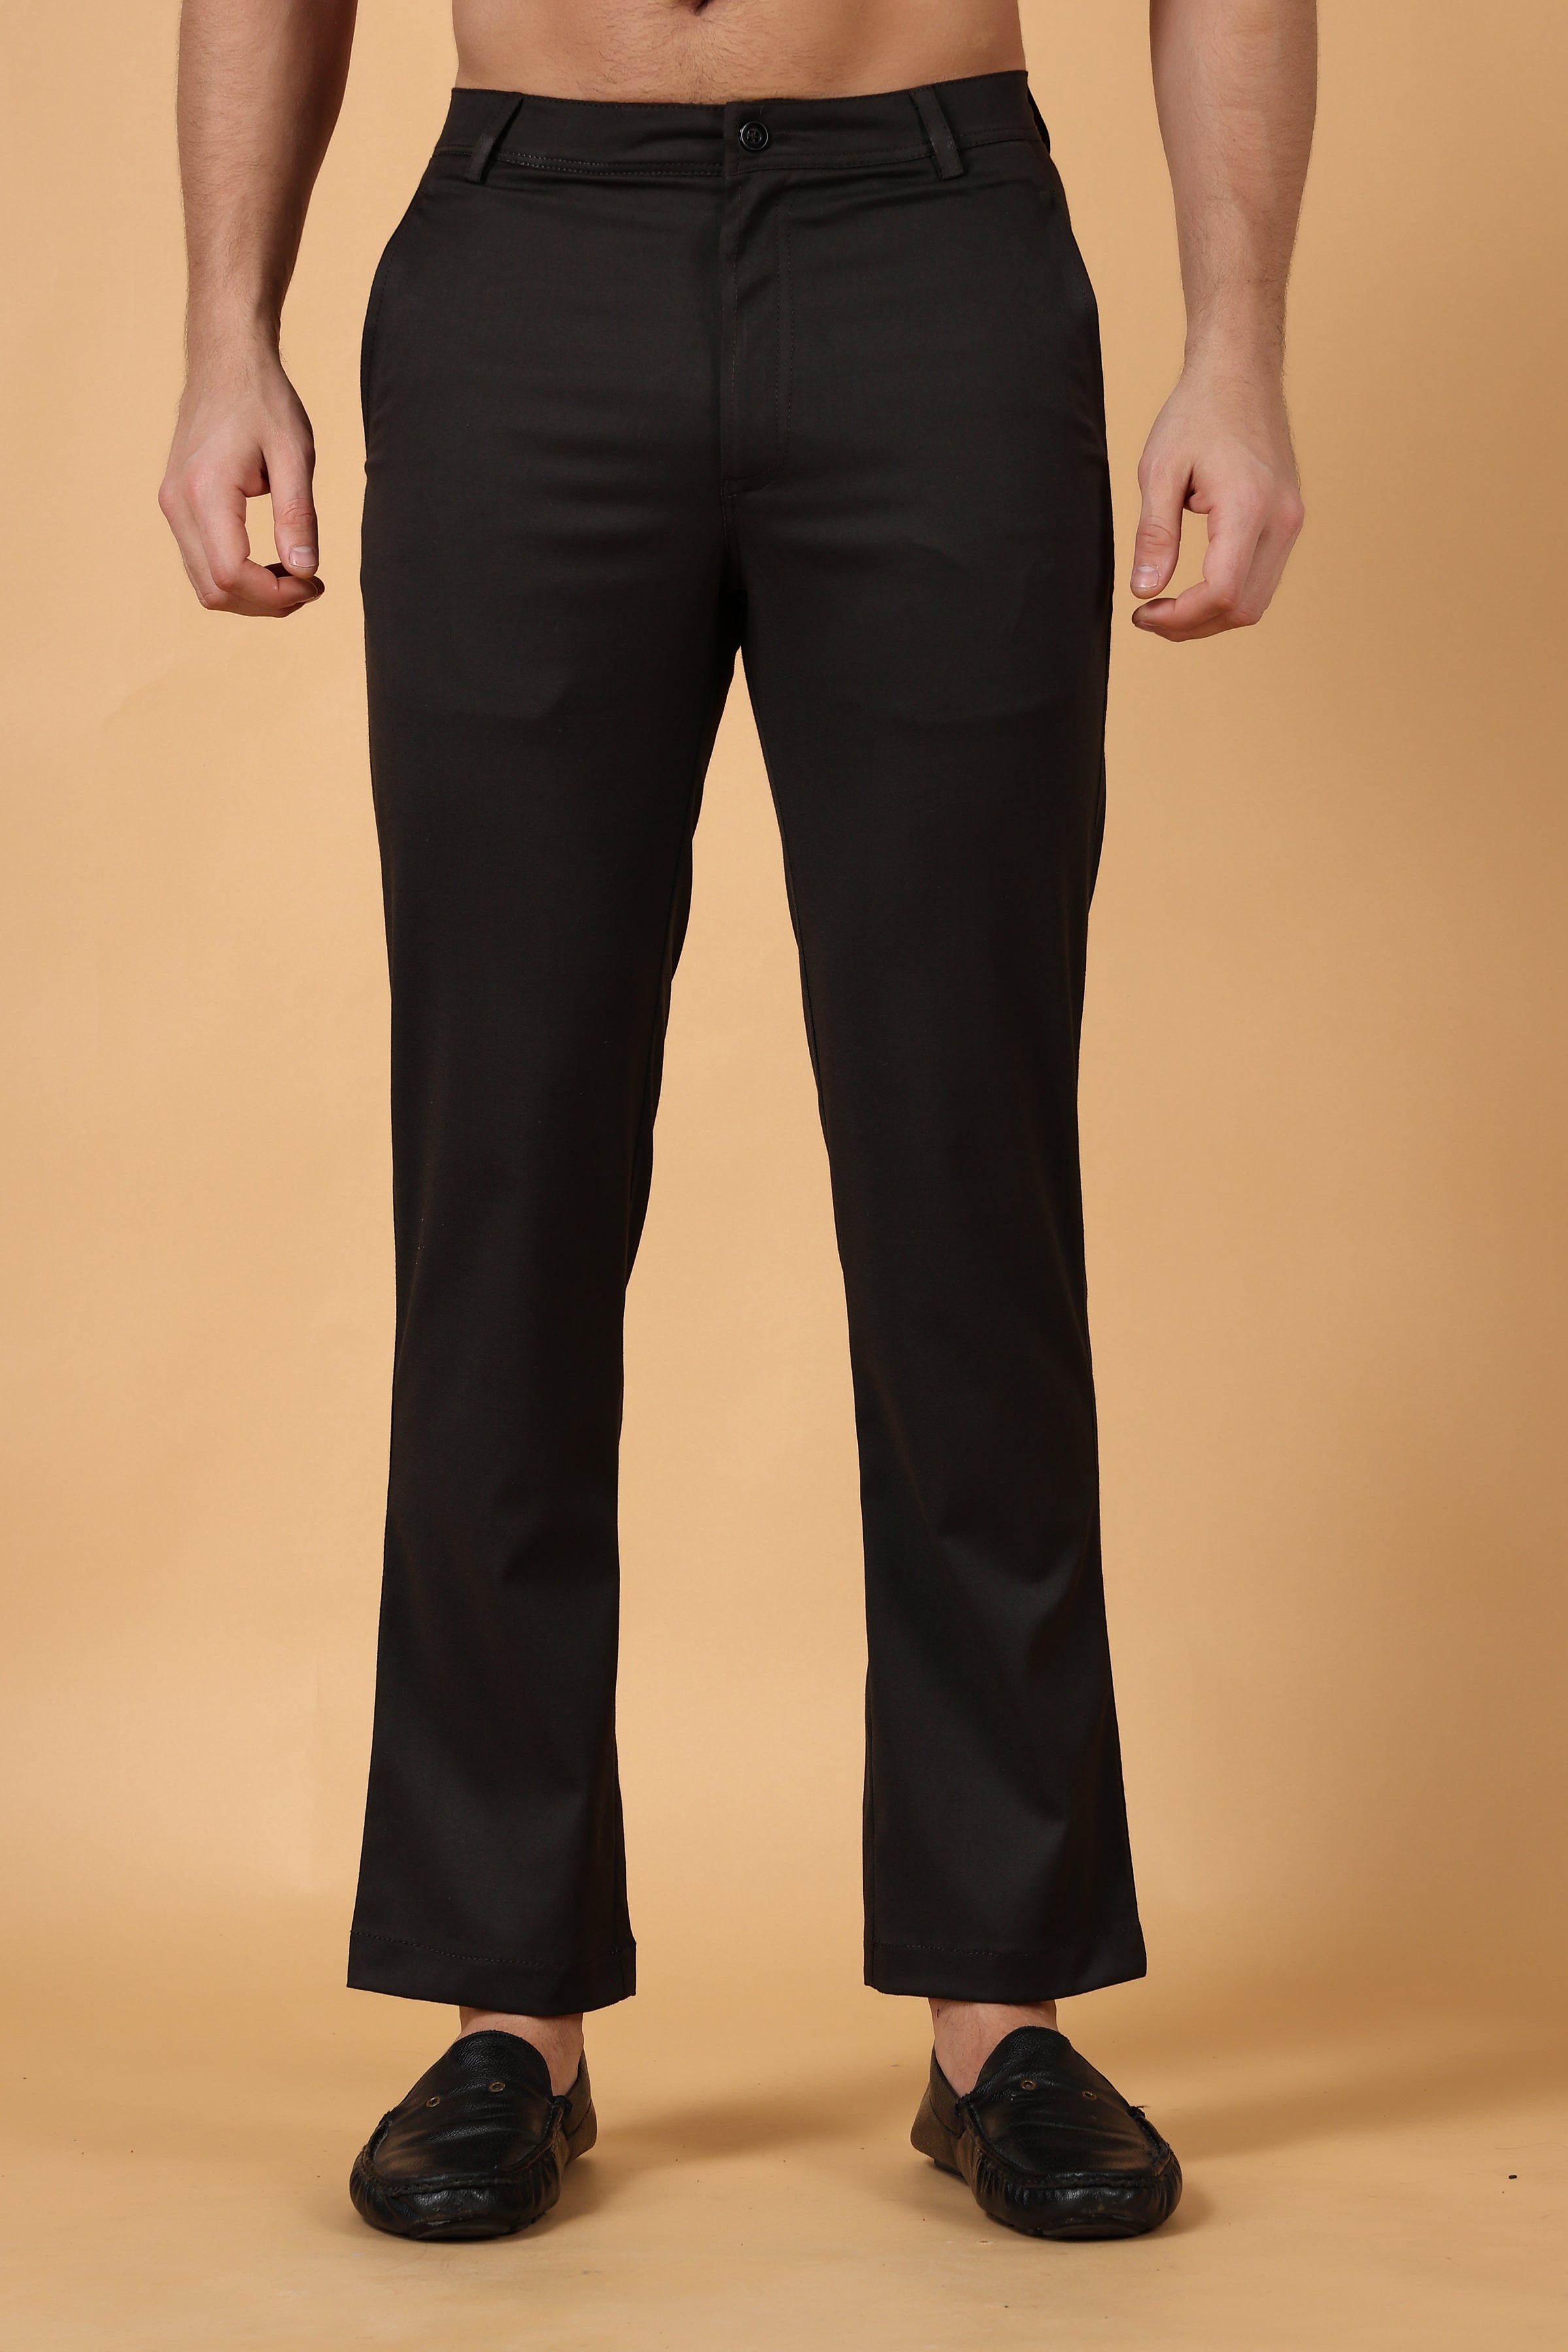 Chinos for Men | Buy Chino Pants for Men Online in India - Westside